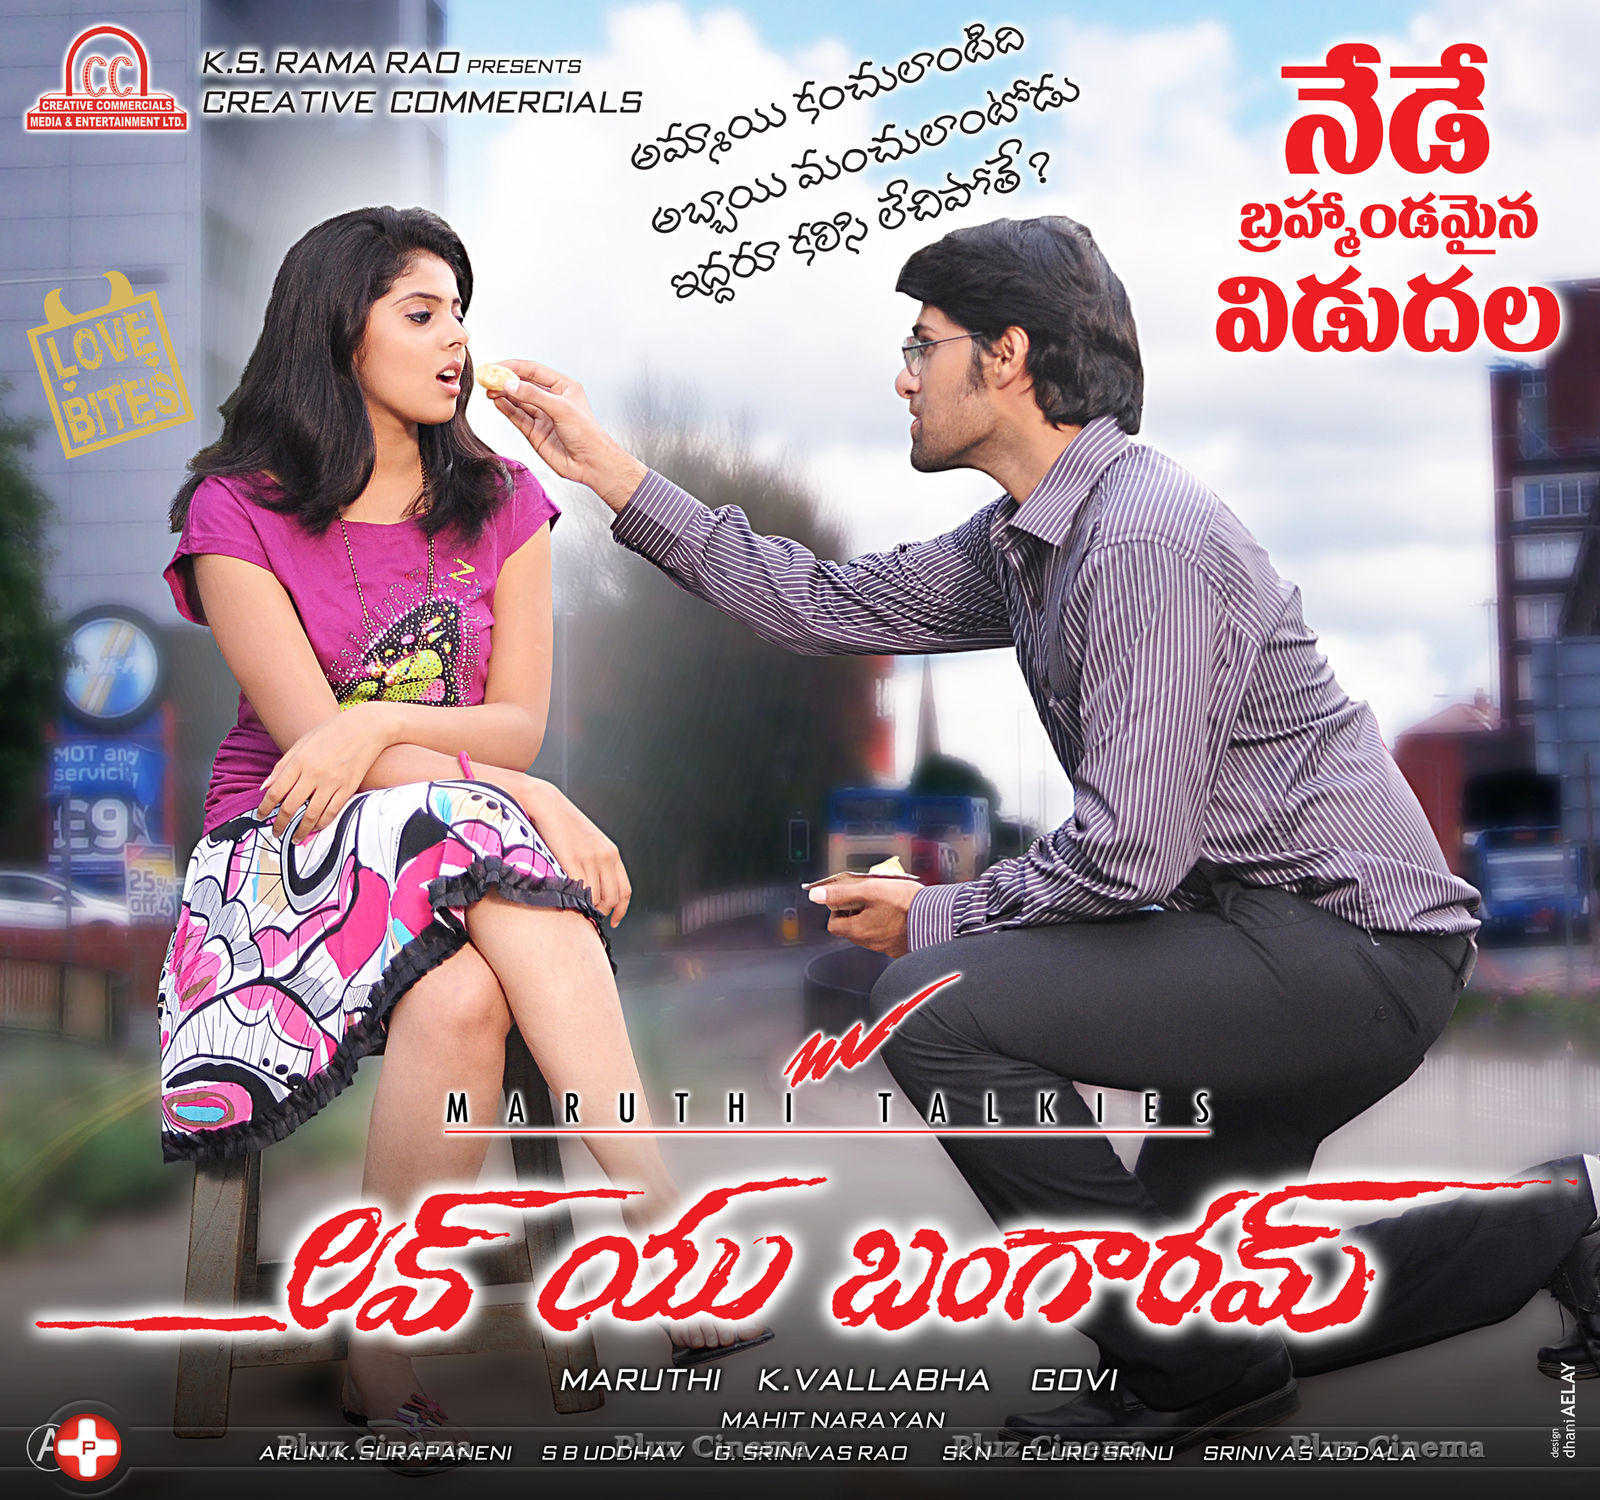 Love You Bangaram Movie Latest Wallpapers | Picture 701787